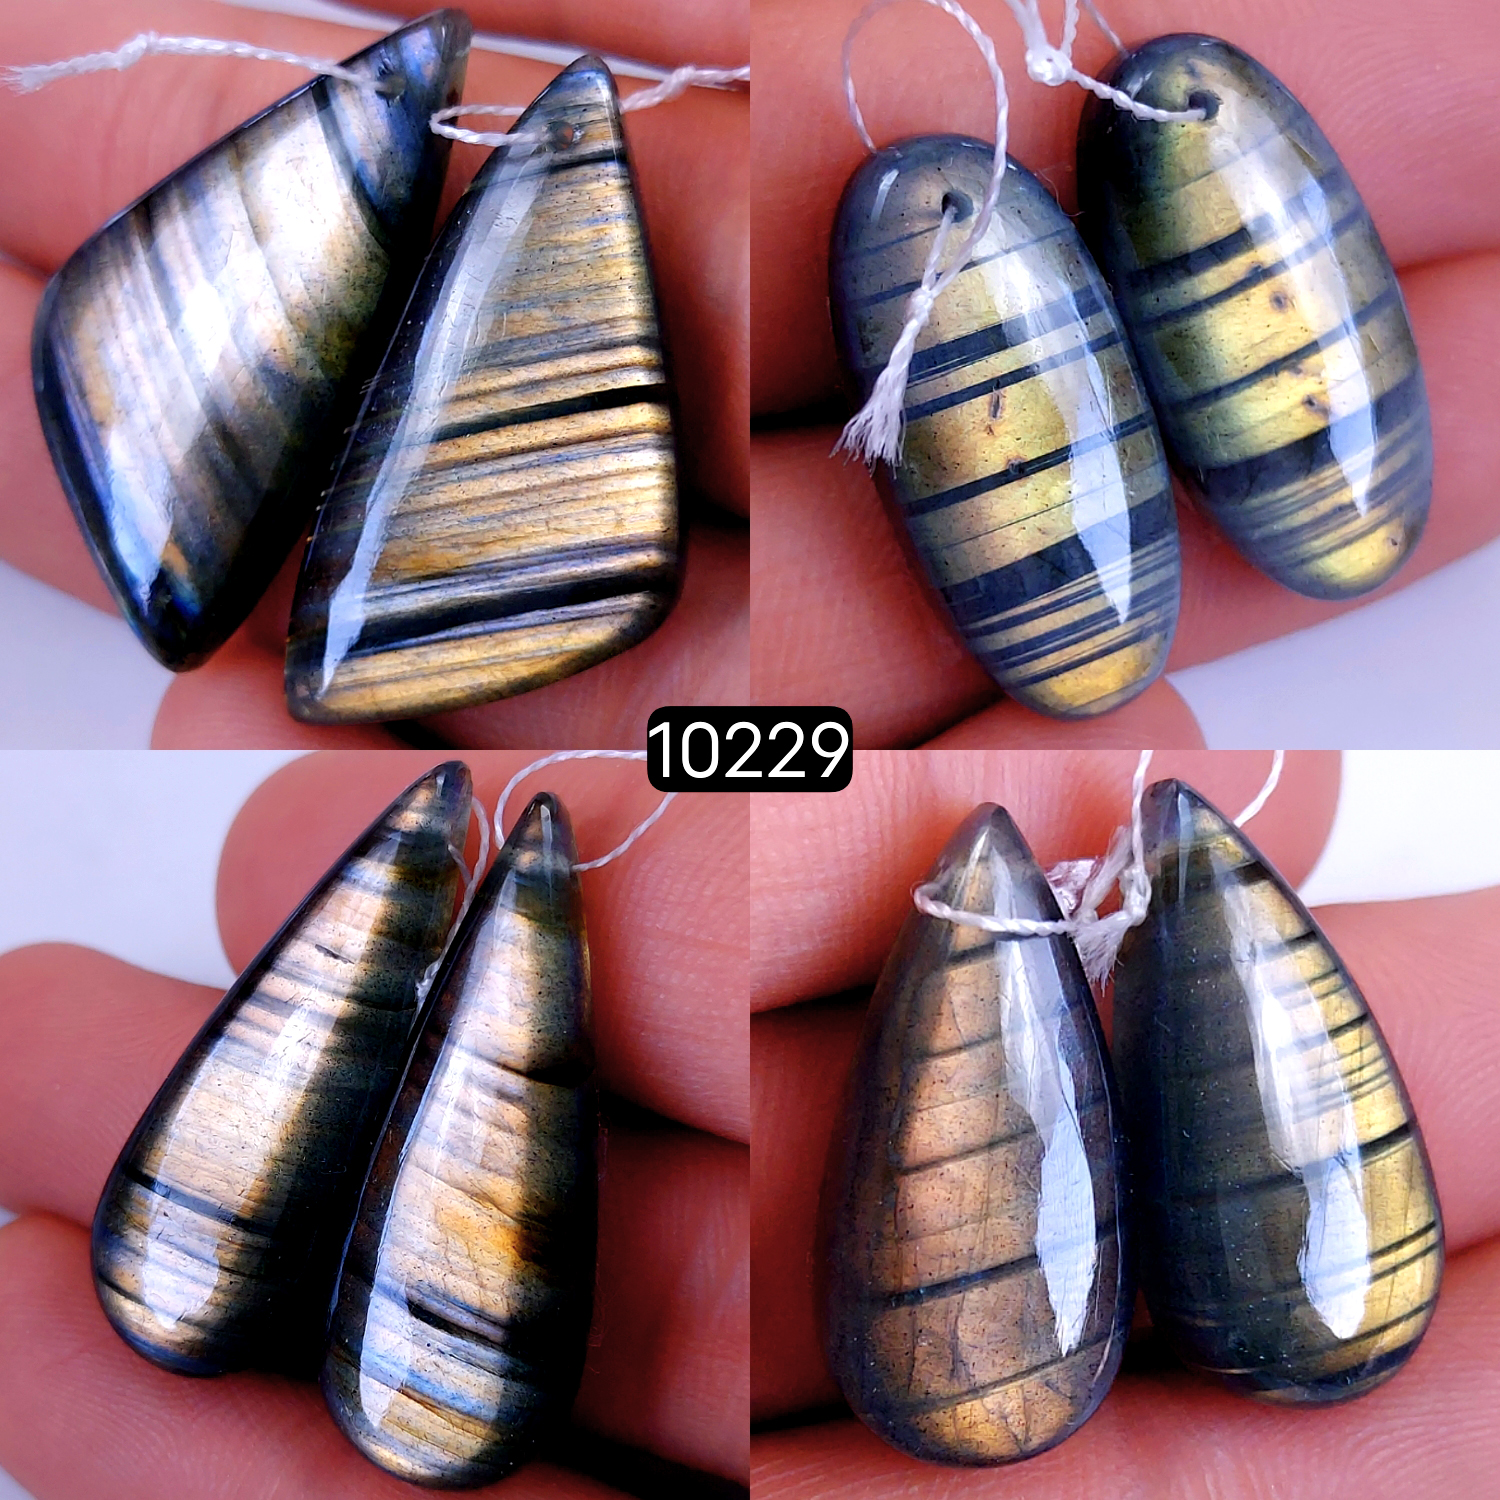 4Pair 144Cts Natural Labradorite Crystal Drill Dangle Drop Earring Pairs Silver Earrings Blue Labradorite Hoop Jewelry  32x12 24x12mm #10229